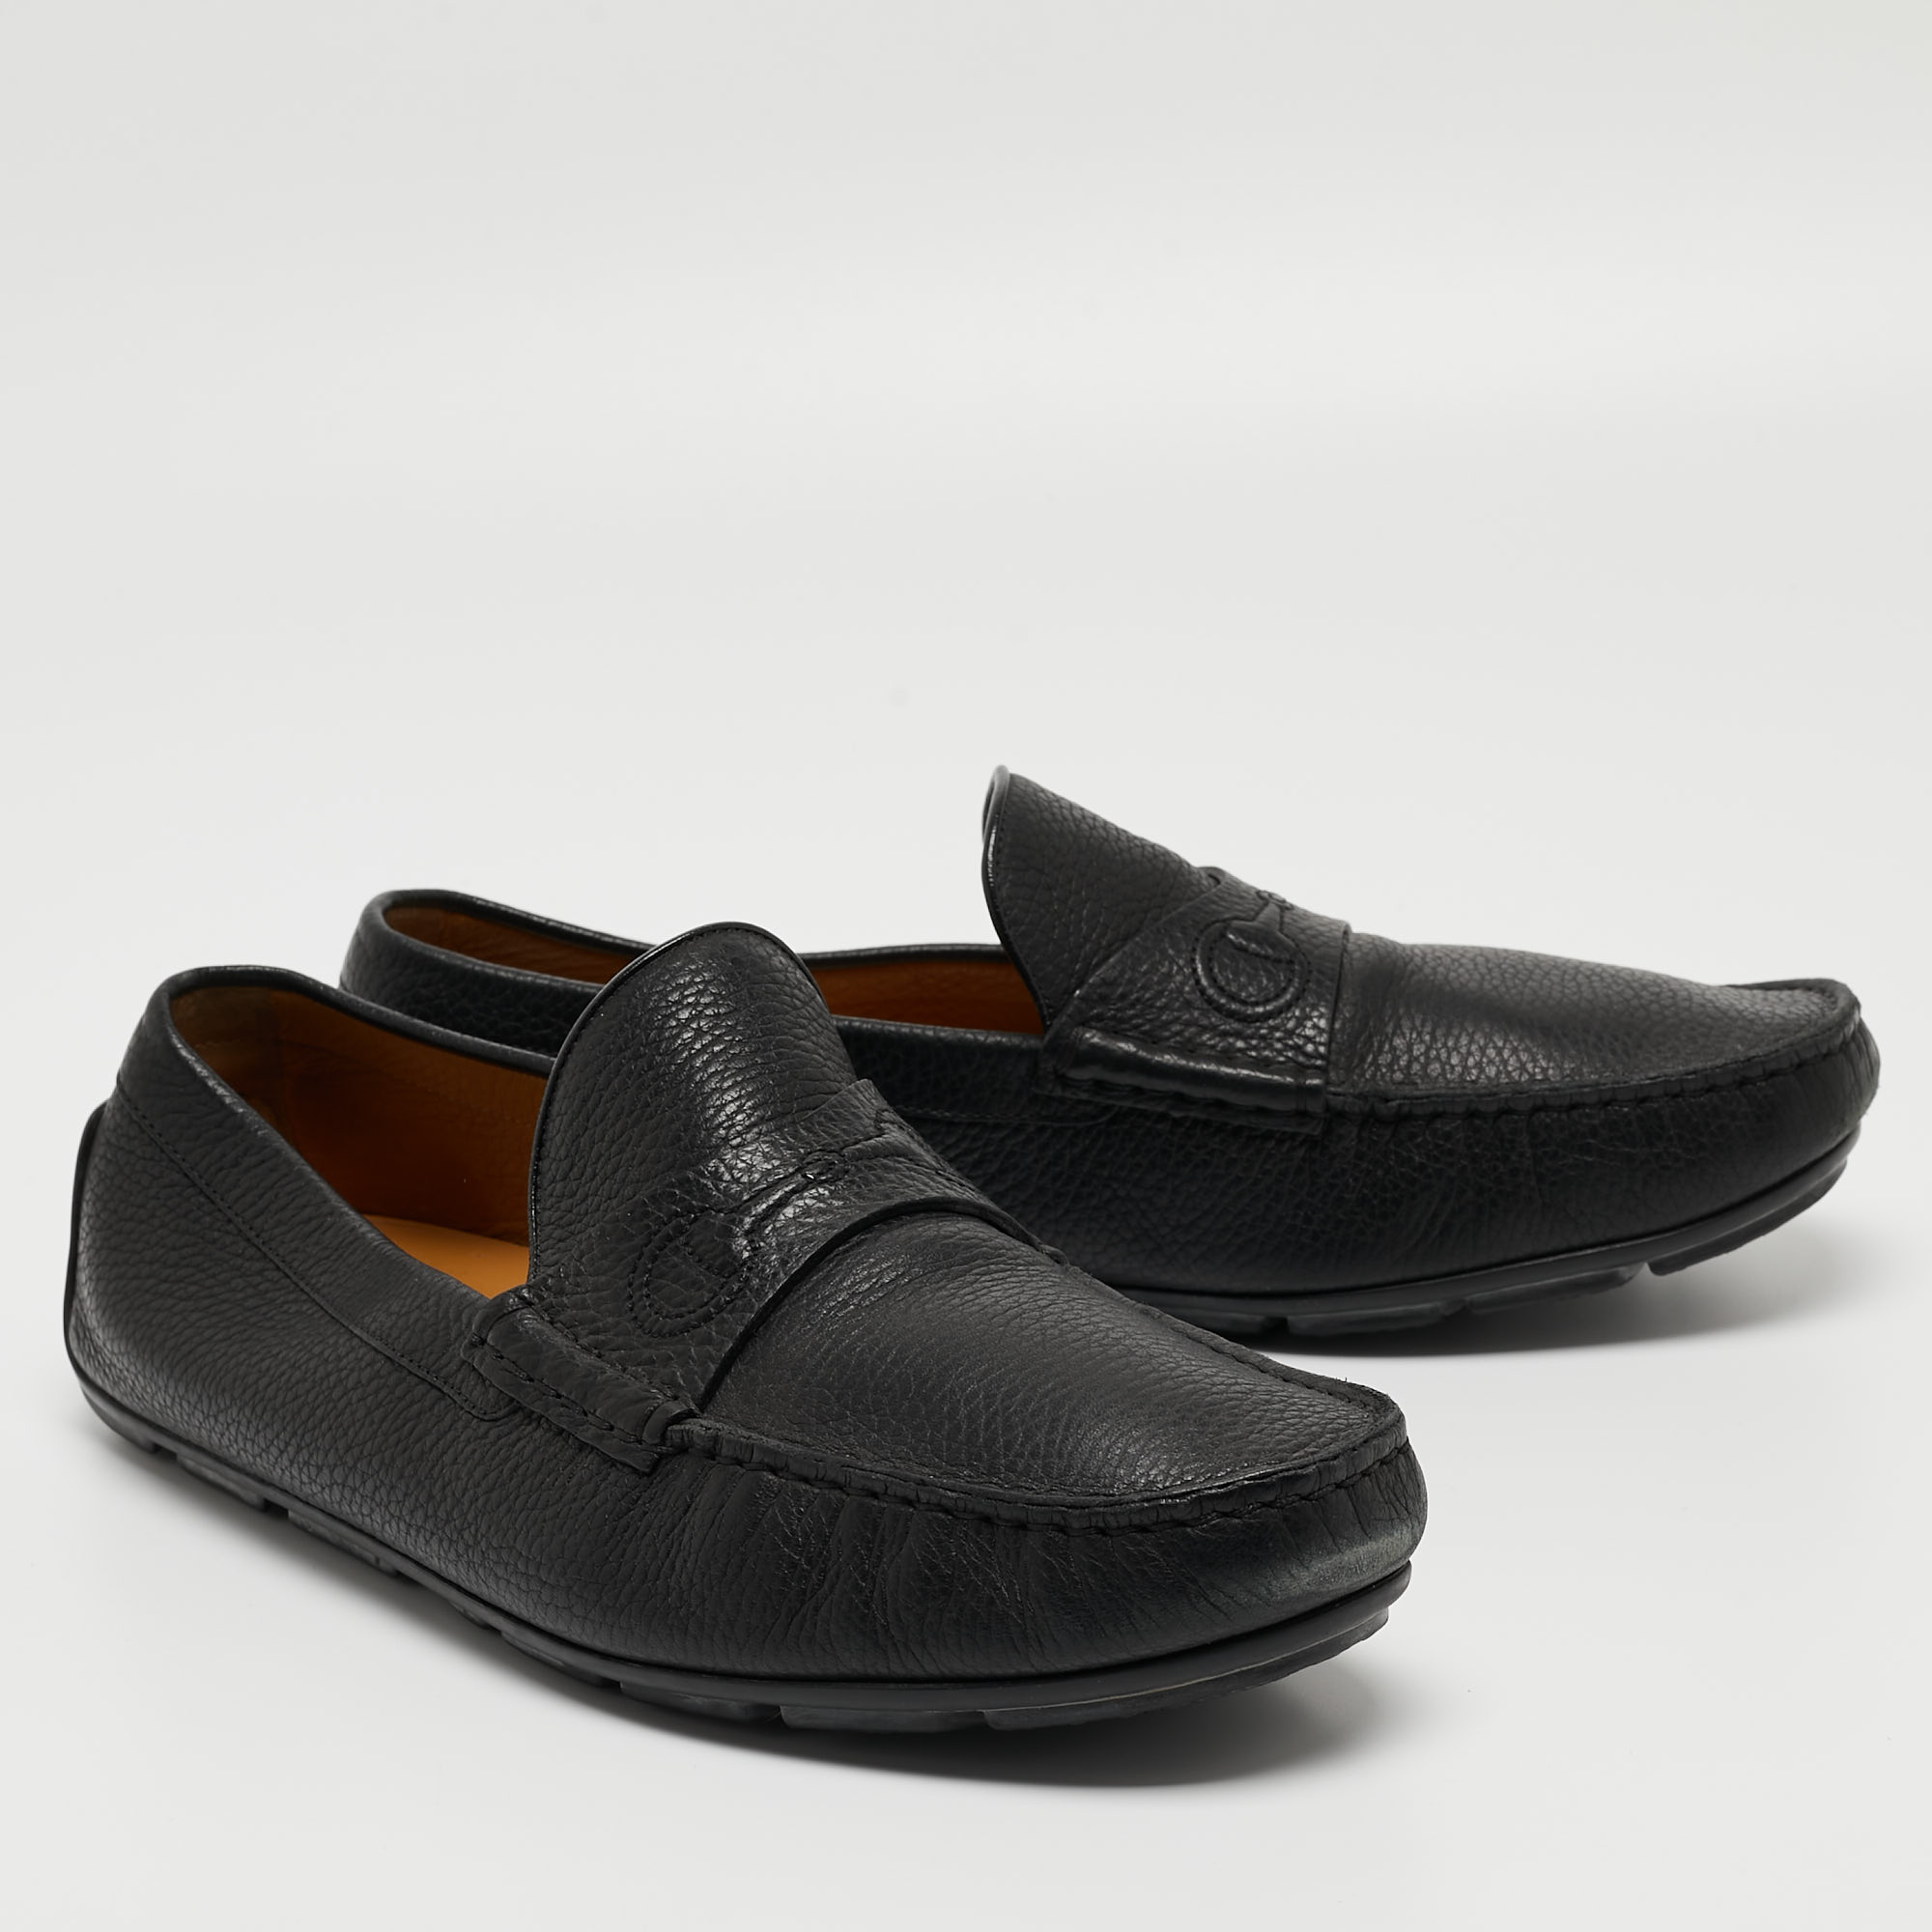 Gucci Black Leather Slip On Loafers  Size 43